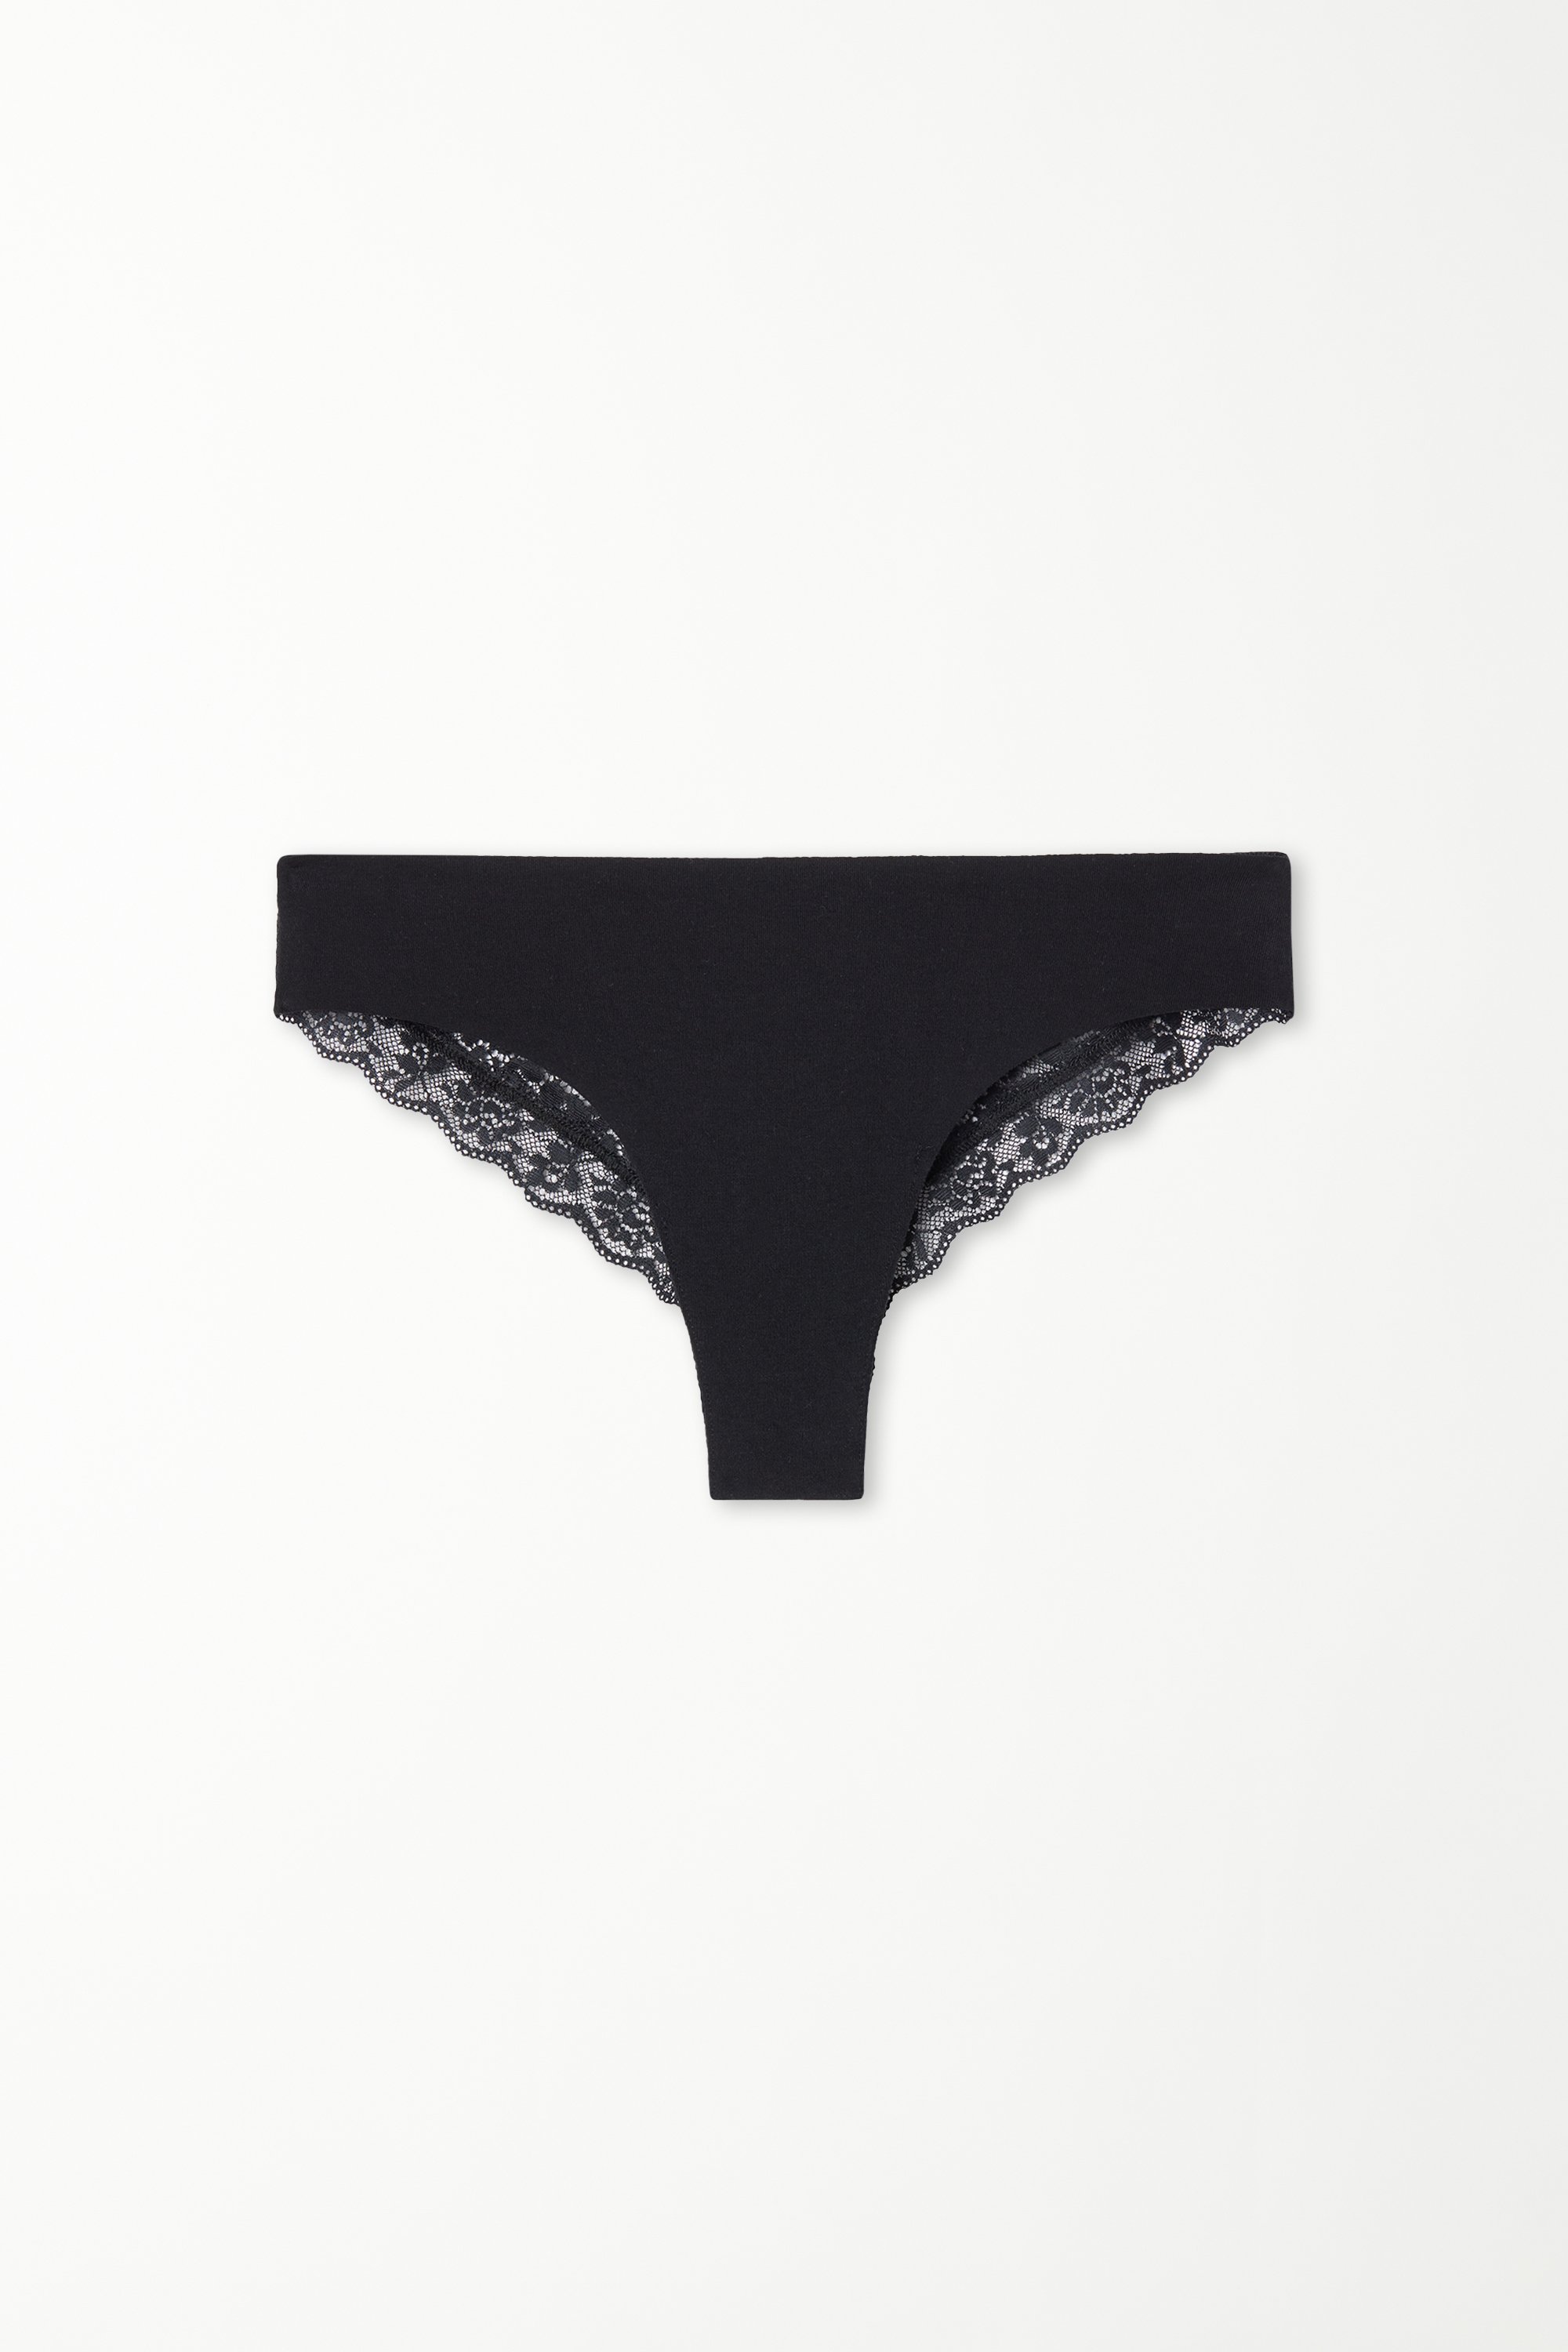 Recycled Lace and Laser Cut Cotton Brazilian Briefs